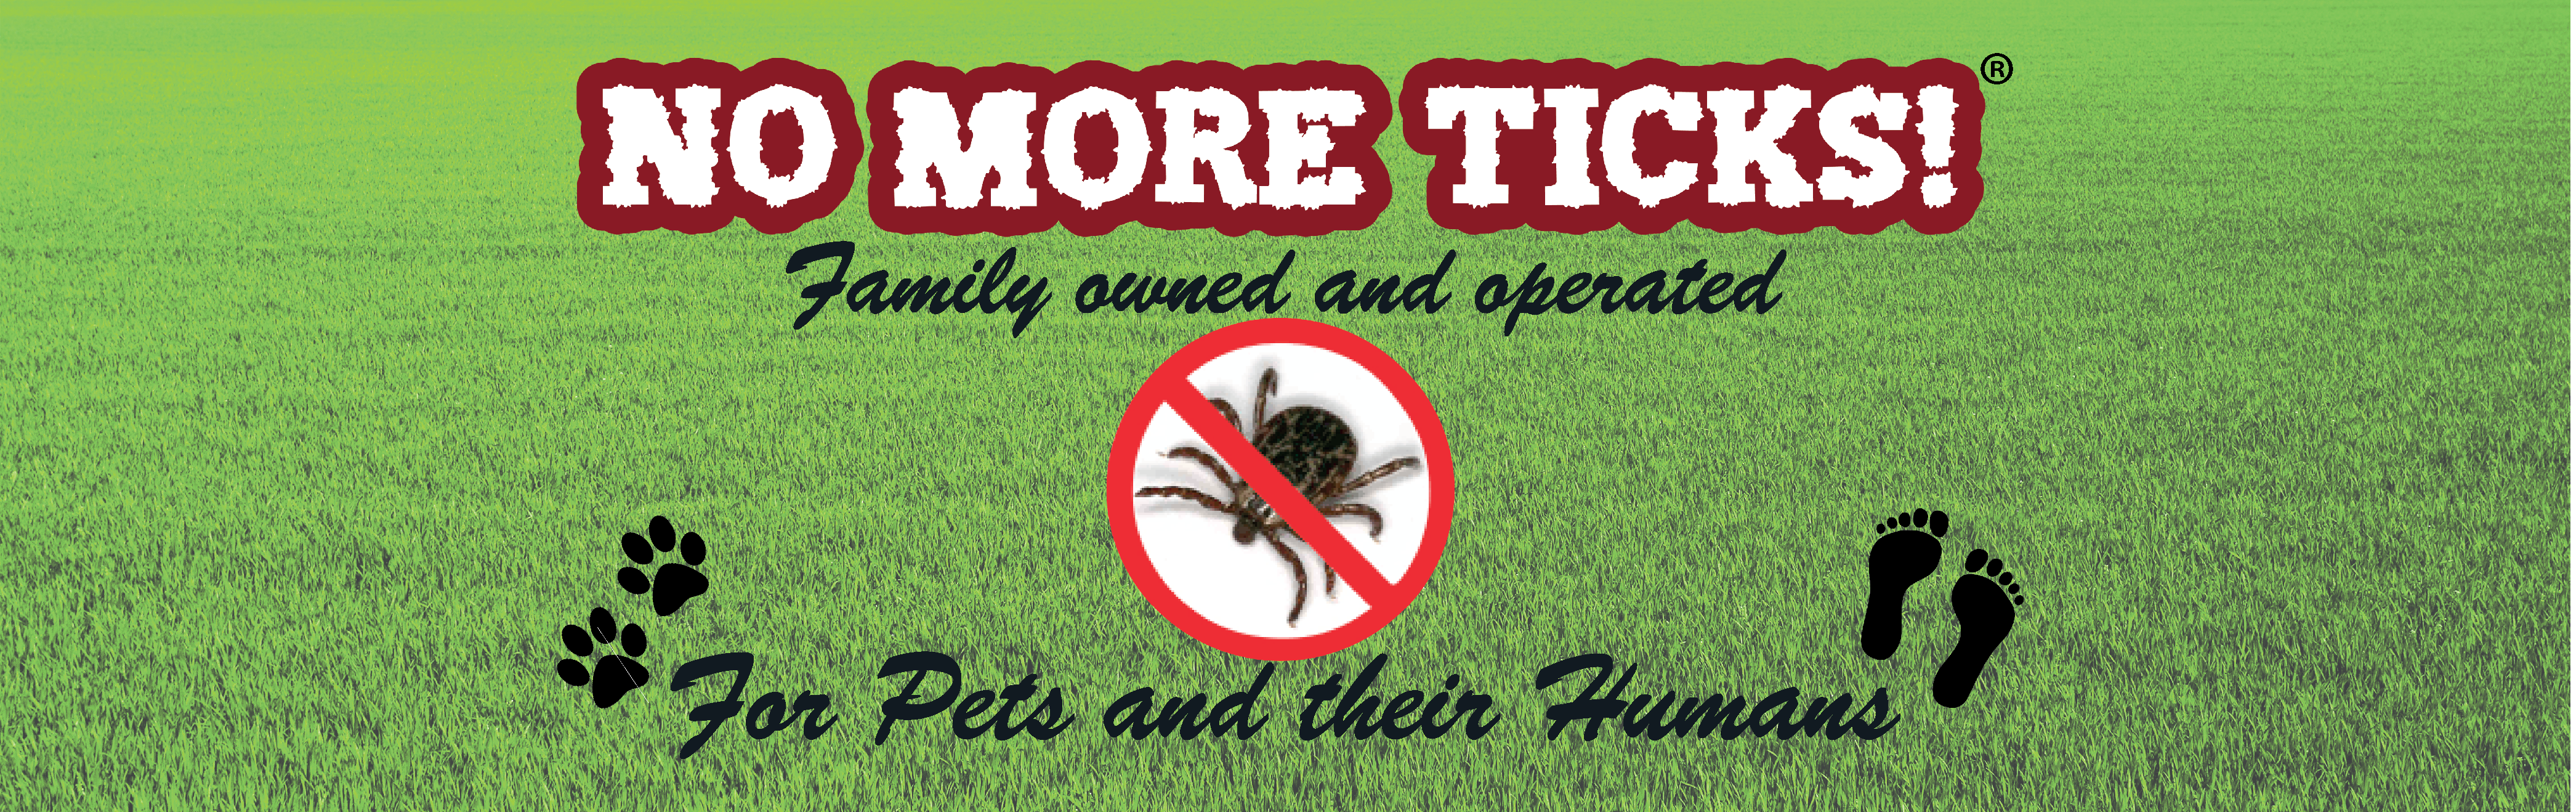 Our Tick, Flea, and Mosquito Formula for Pets and their Humans,